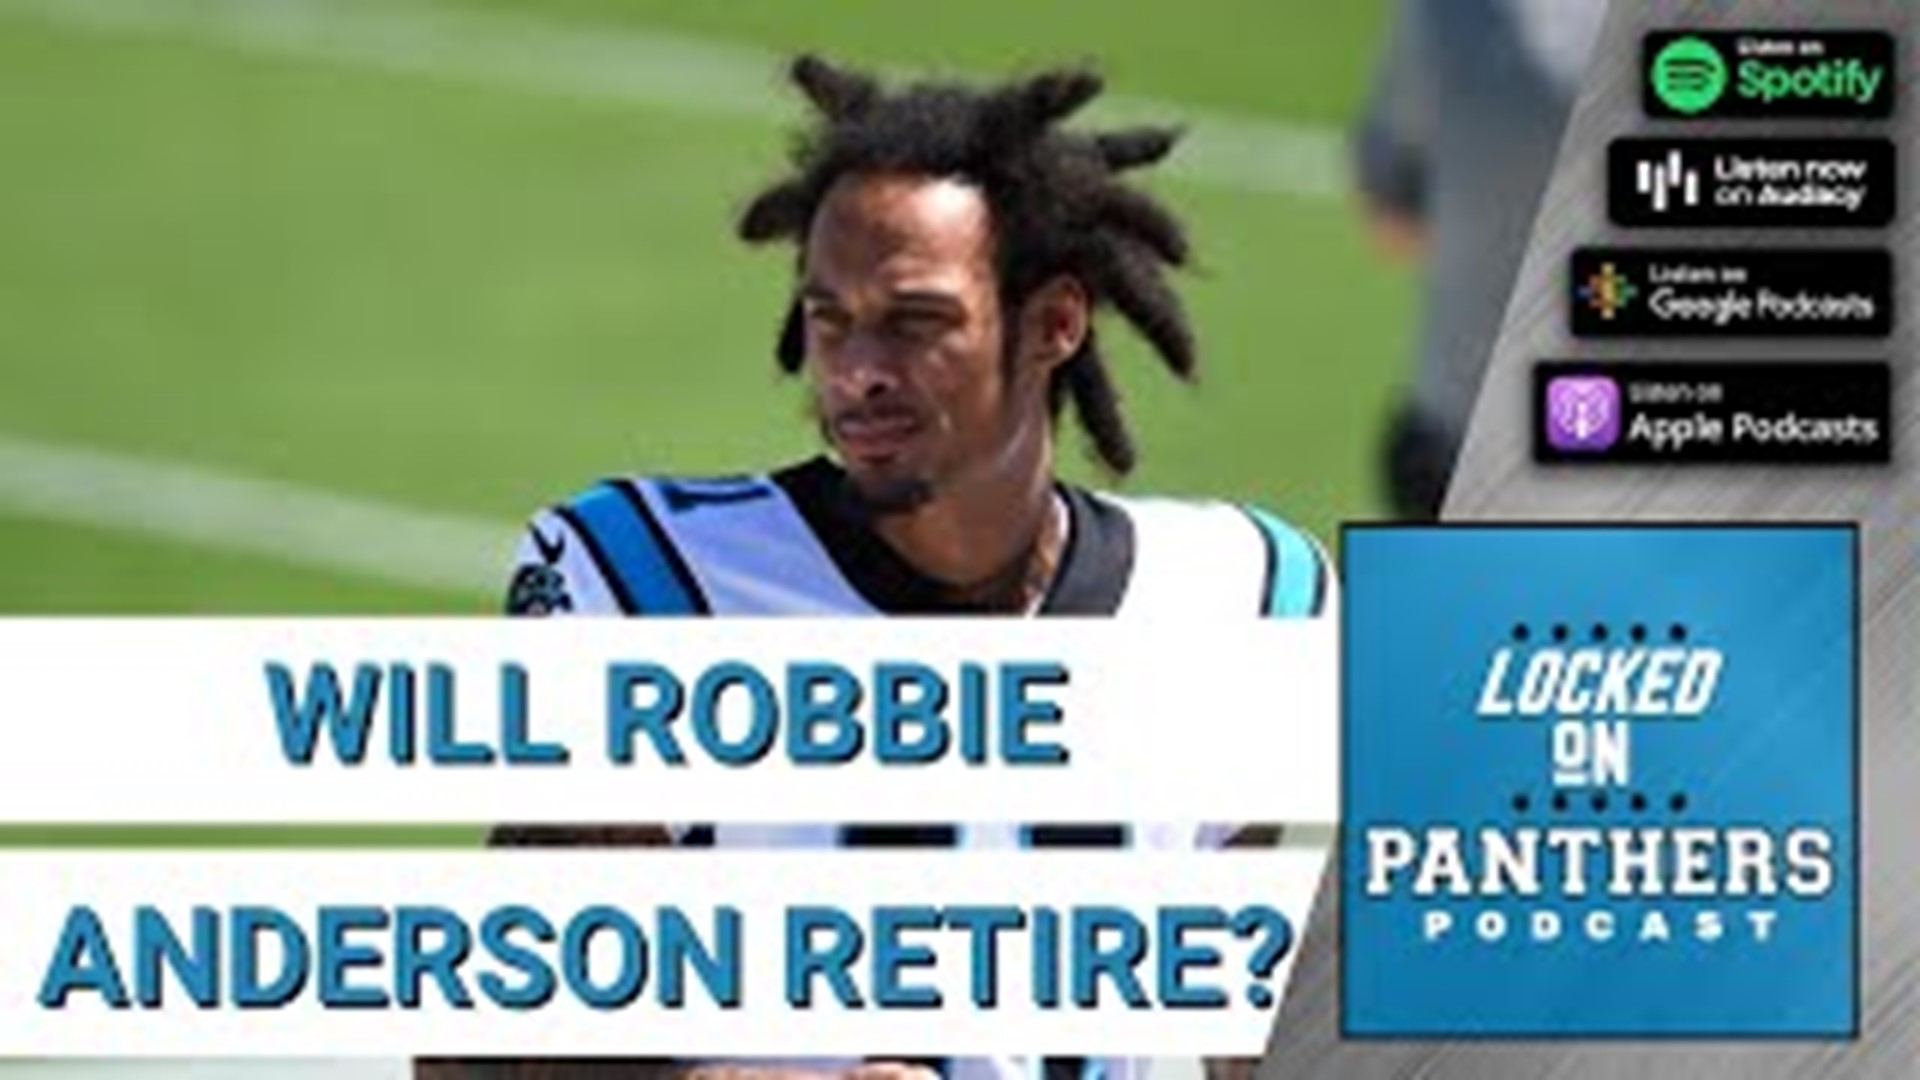 Robbie Anderson made waves posting a since-deleted tweet suggesting he was contemplating retiring. How concerned should the Panthers be about Anderson's commitment?